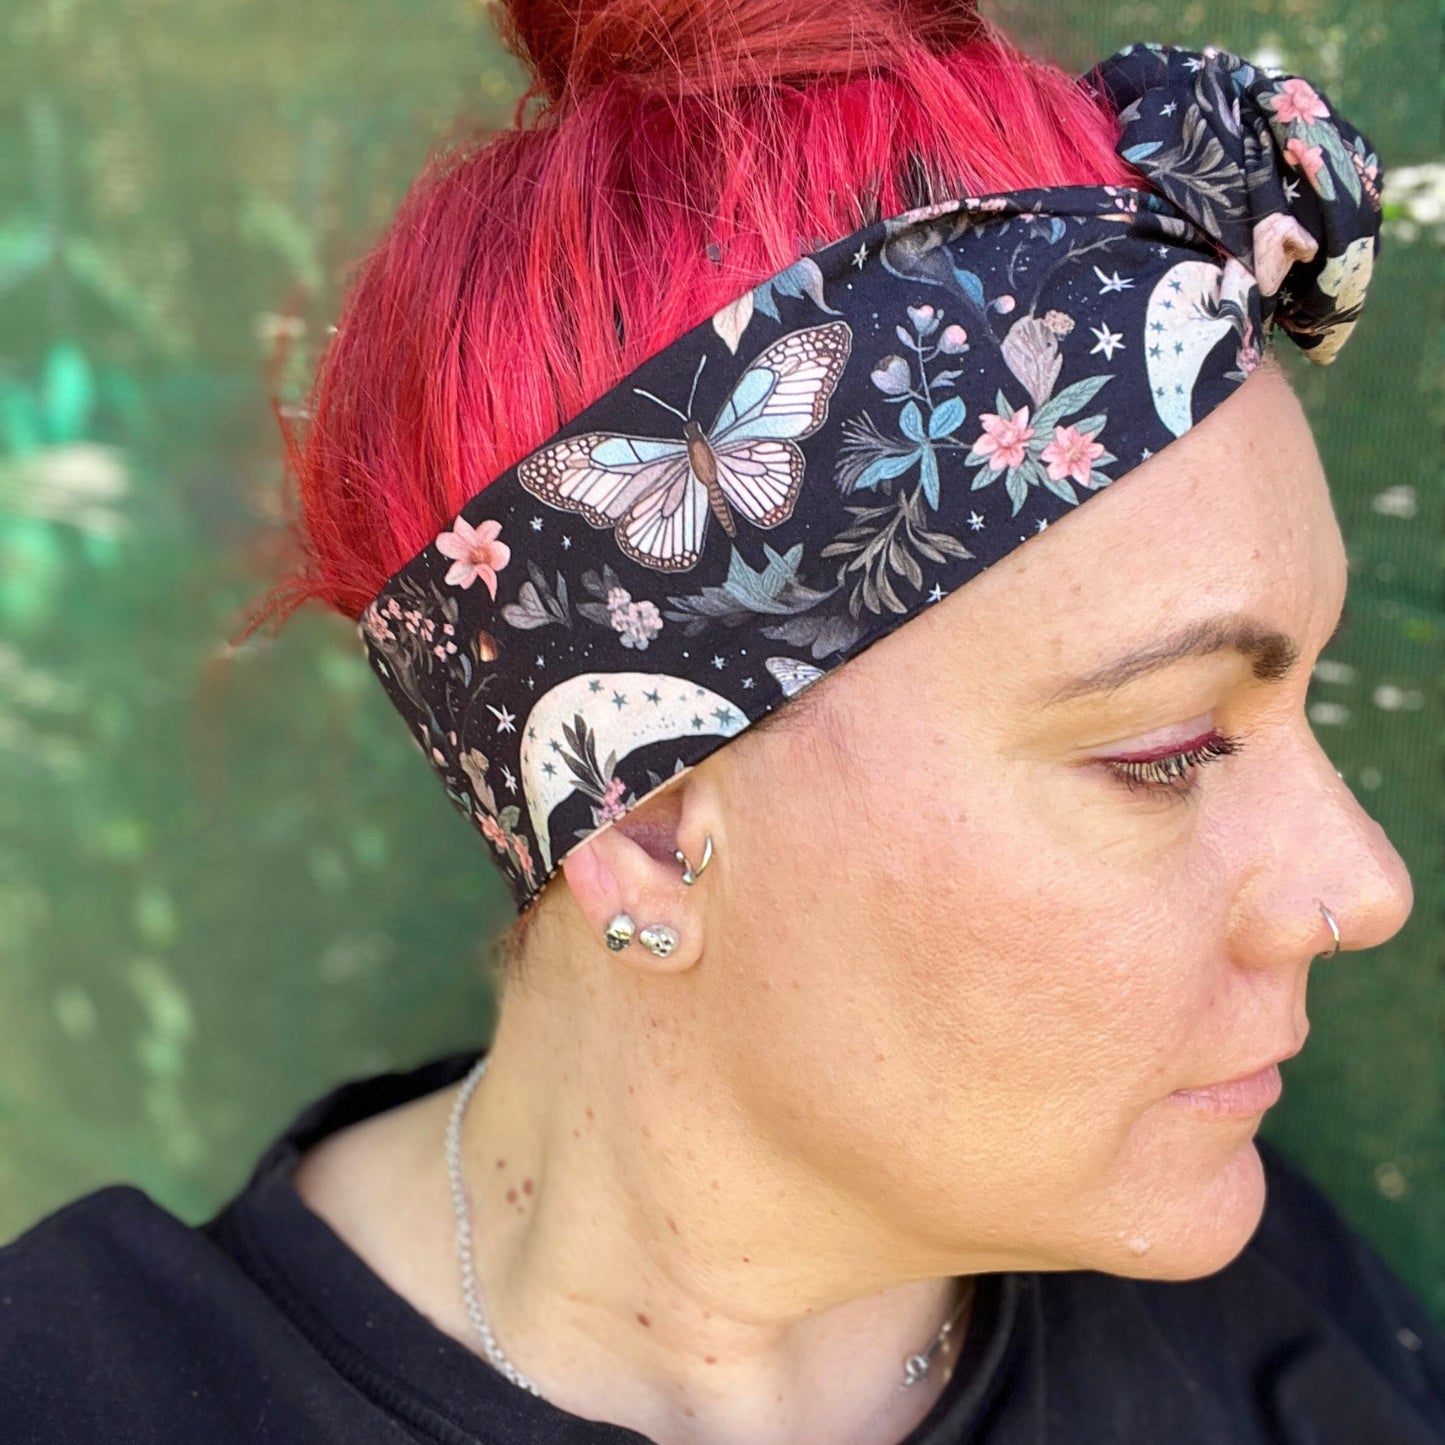  a wire headwrap featuring a mystical garden theme. The headwrap is black and illustrated with delicate butterflies, stars, and an array of soft-colored flowers, creating an enchanting look. It is tied at the top, adding an elegant twist to the design